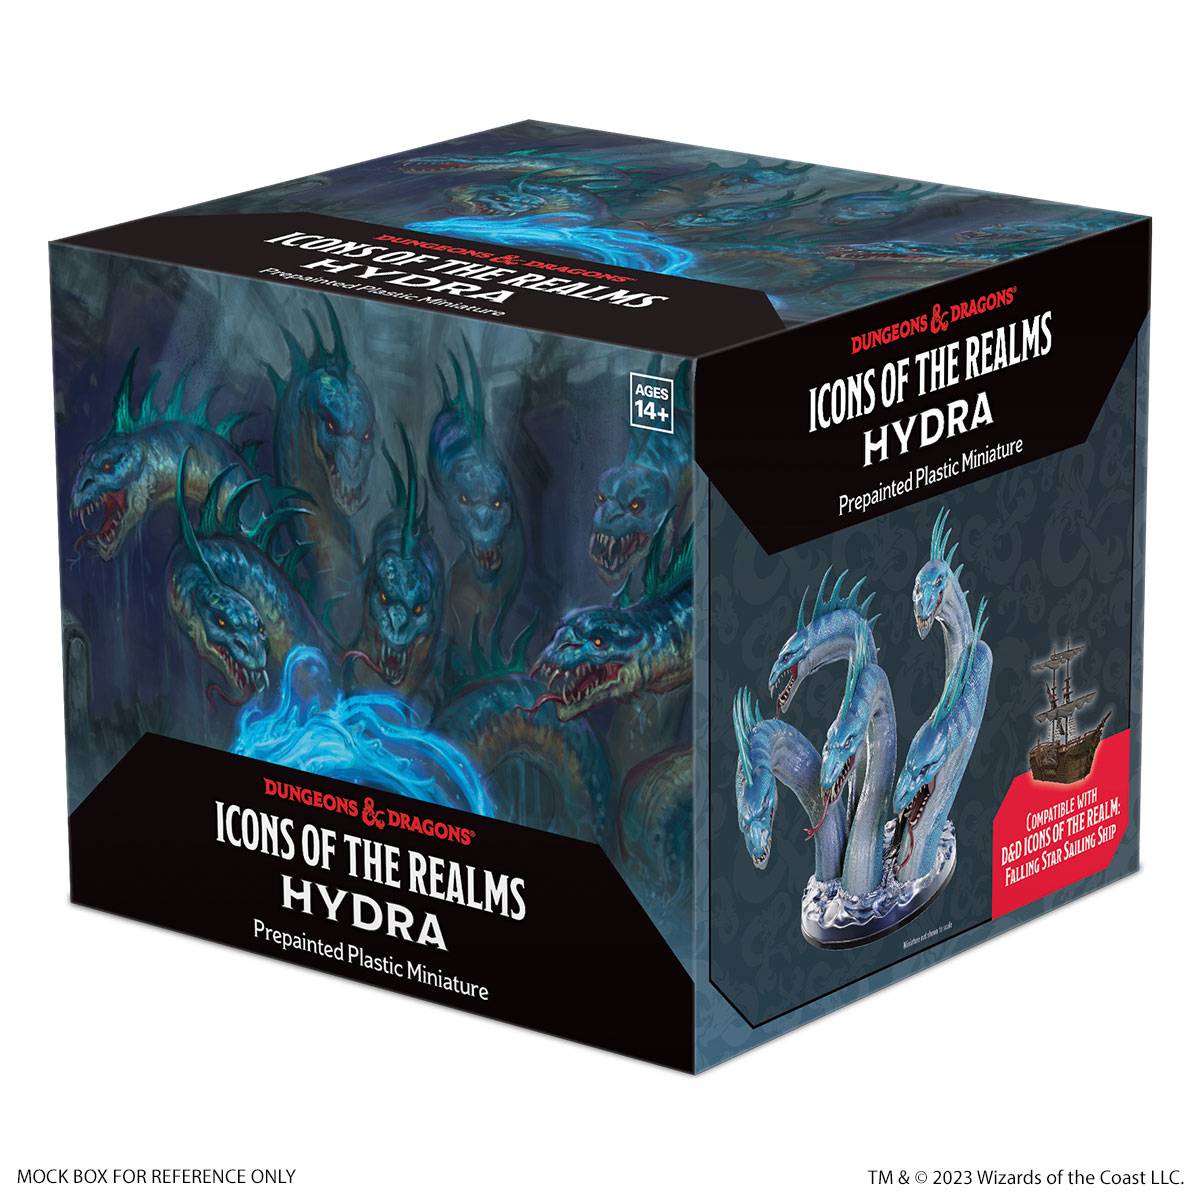 D&D ICONS REALMS HYDRA BOXED MINIS